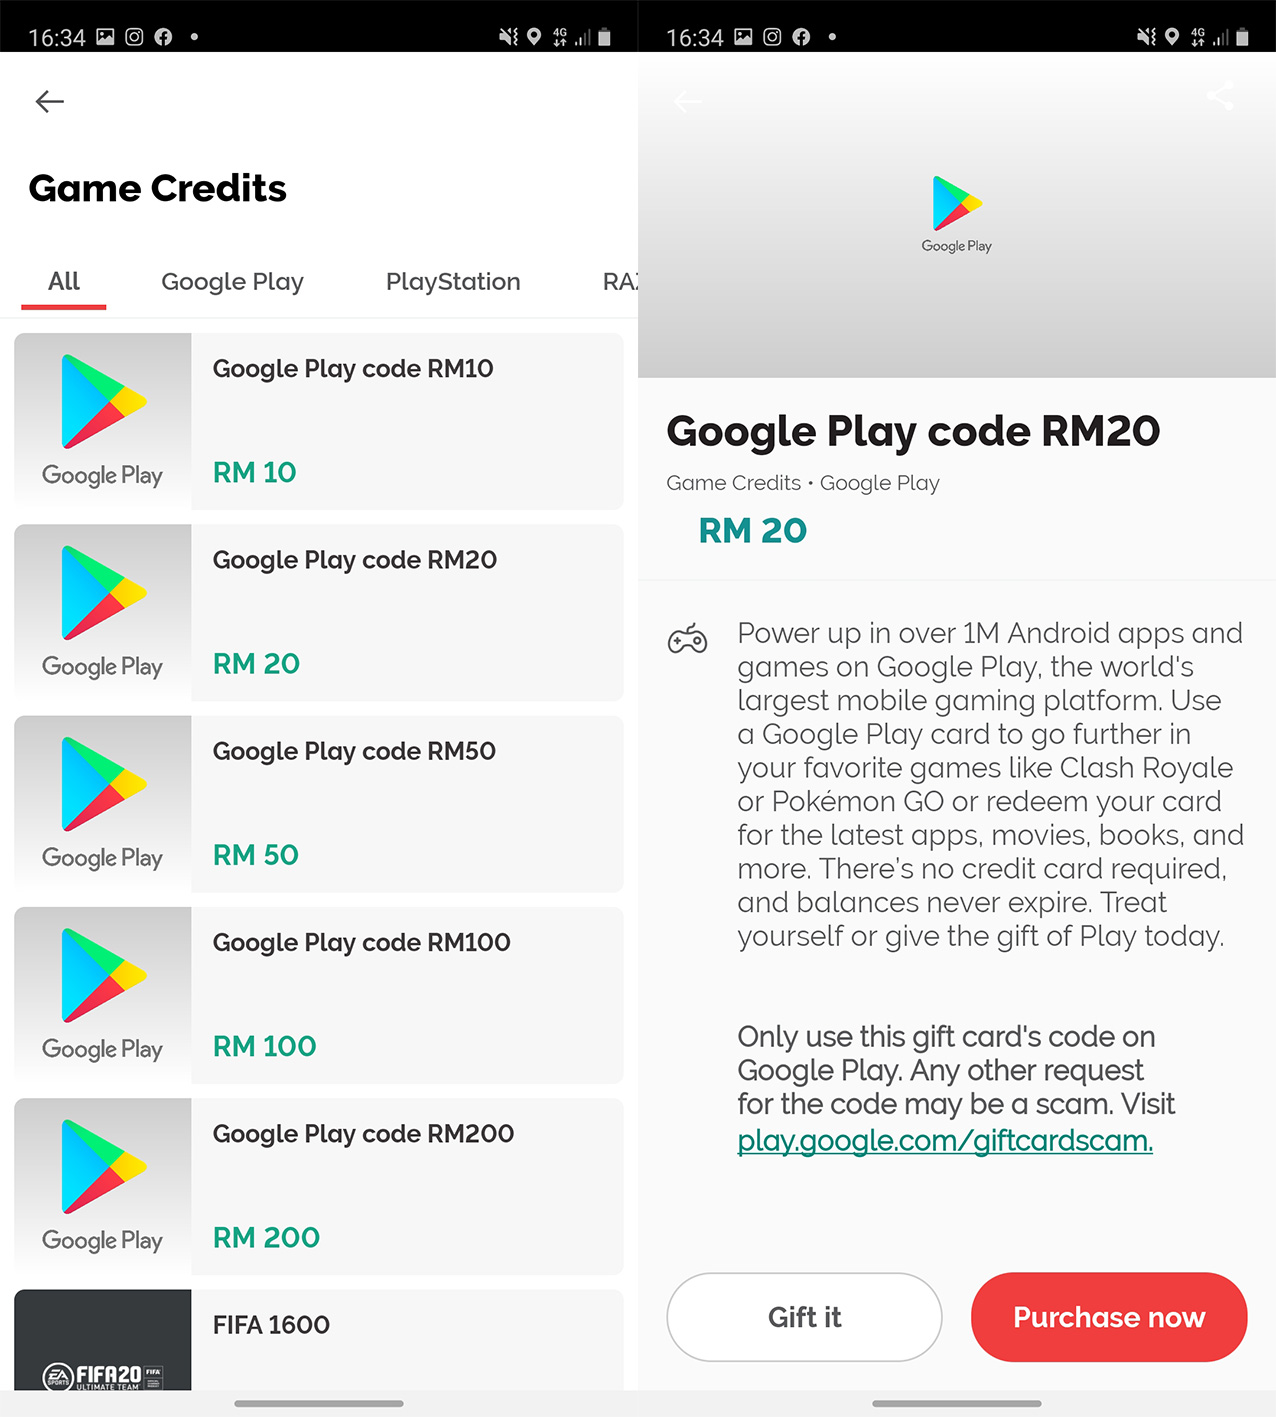 What Can I Do With Google Play Credit